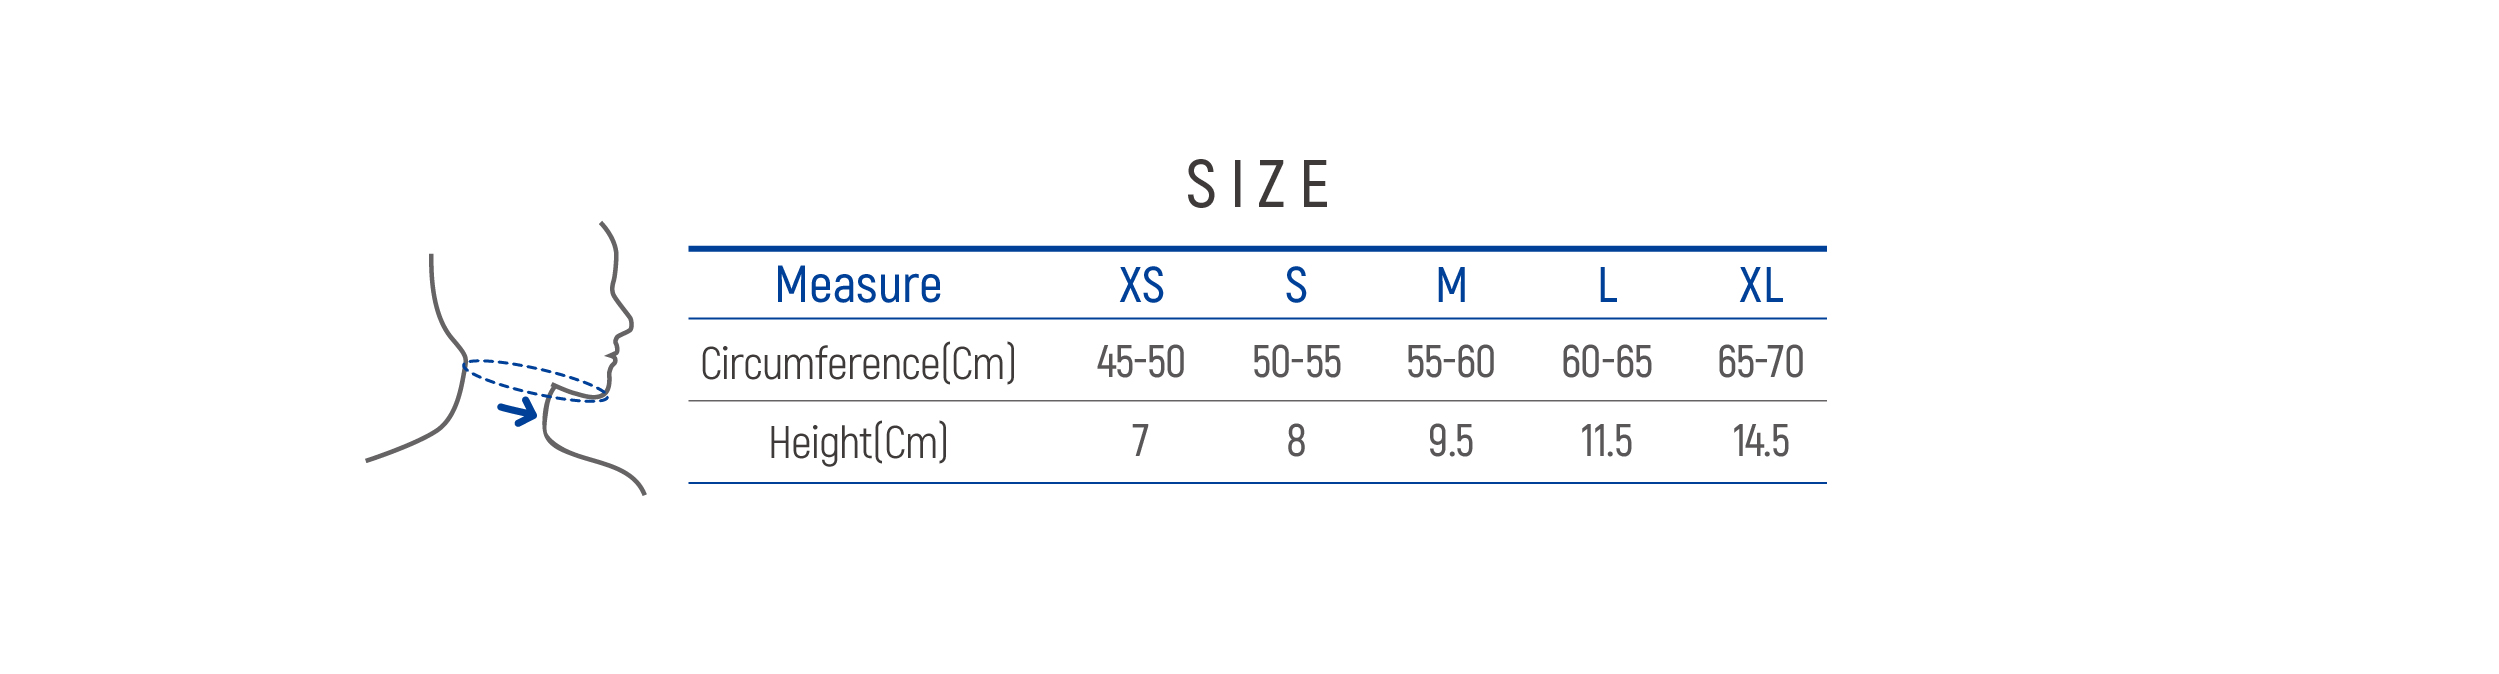 DR-127 Size table image